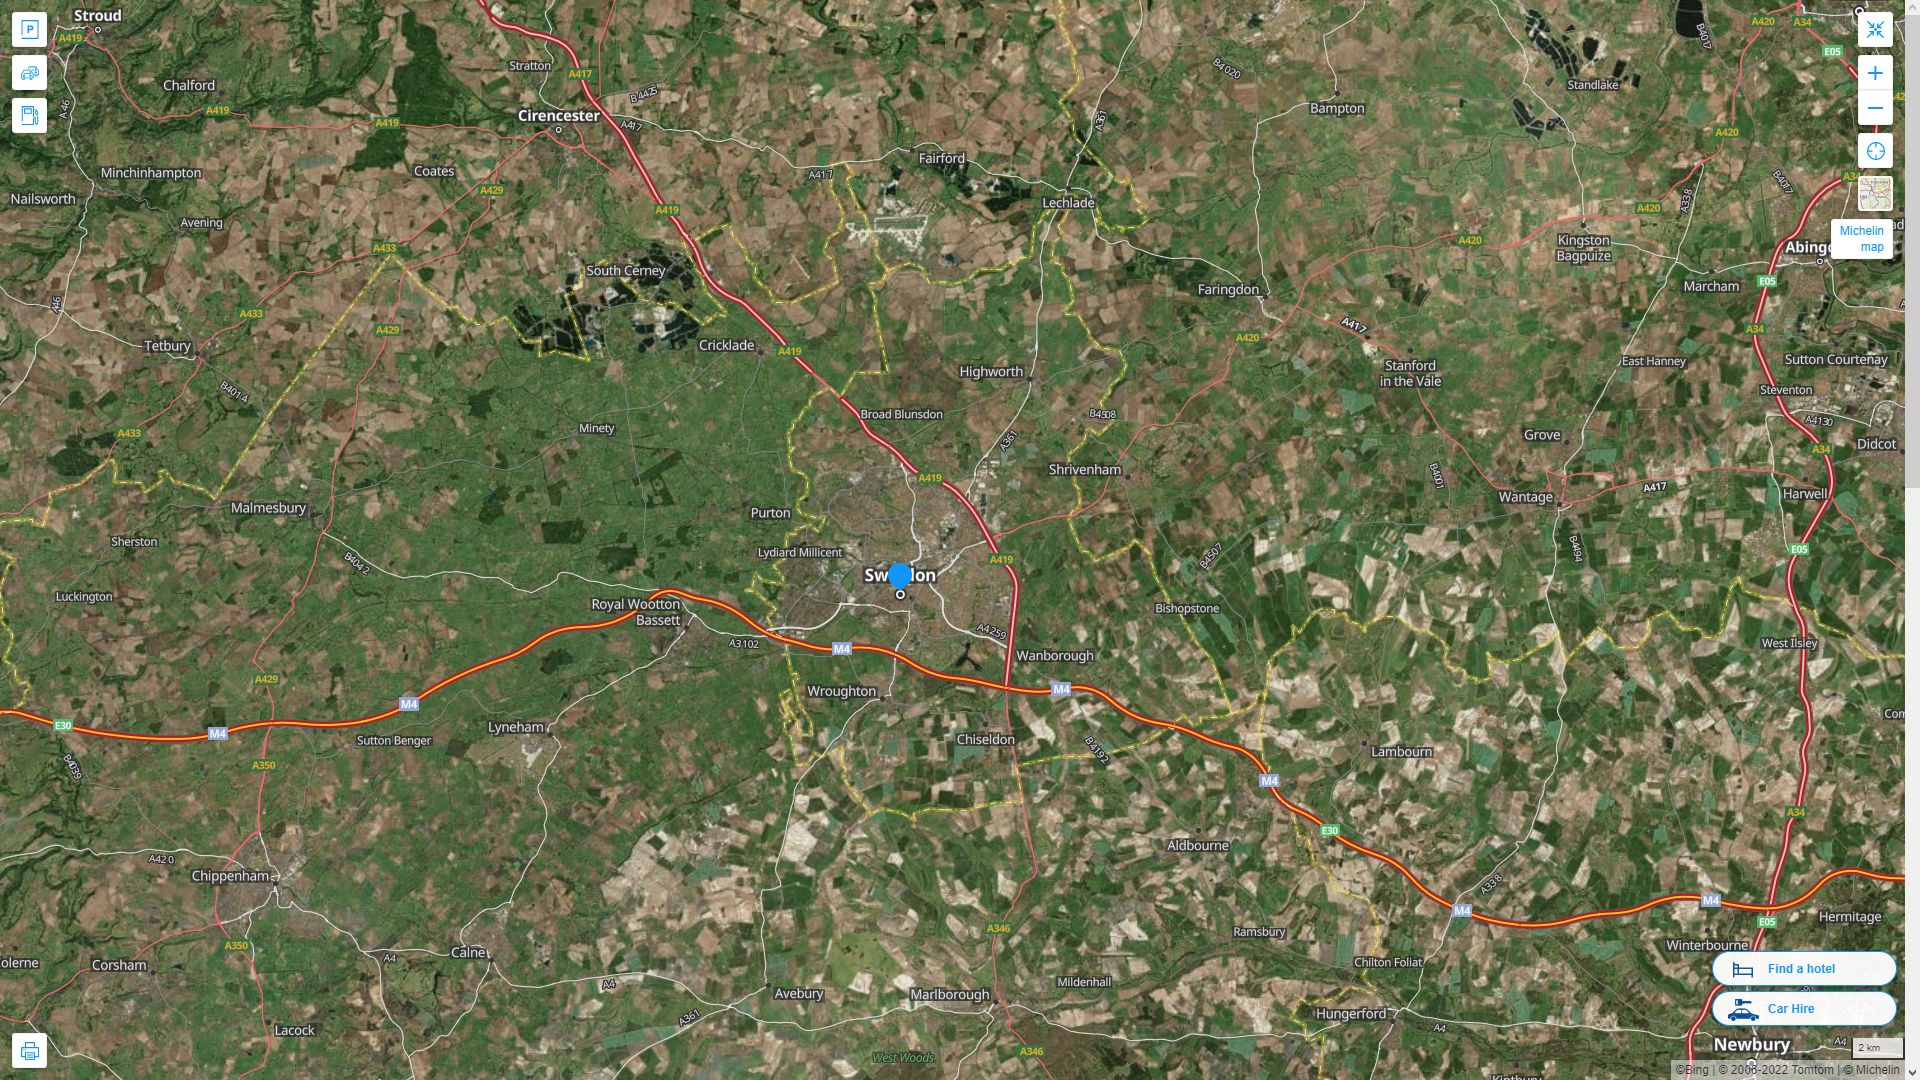 Swindon Highway and Road Map with Satellite View